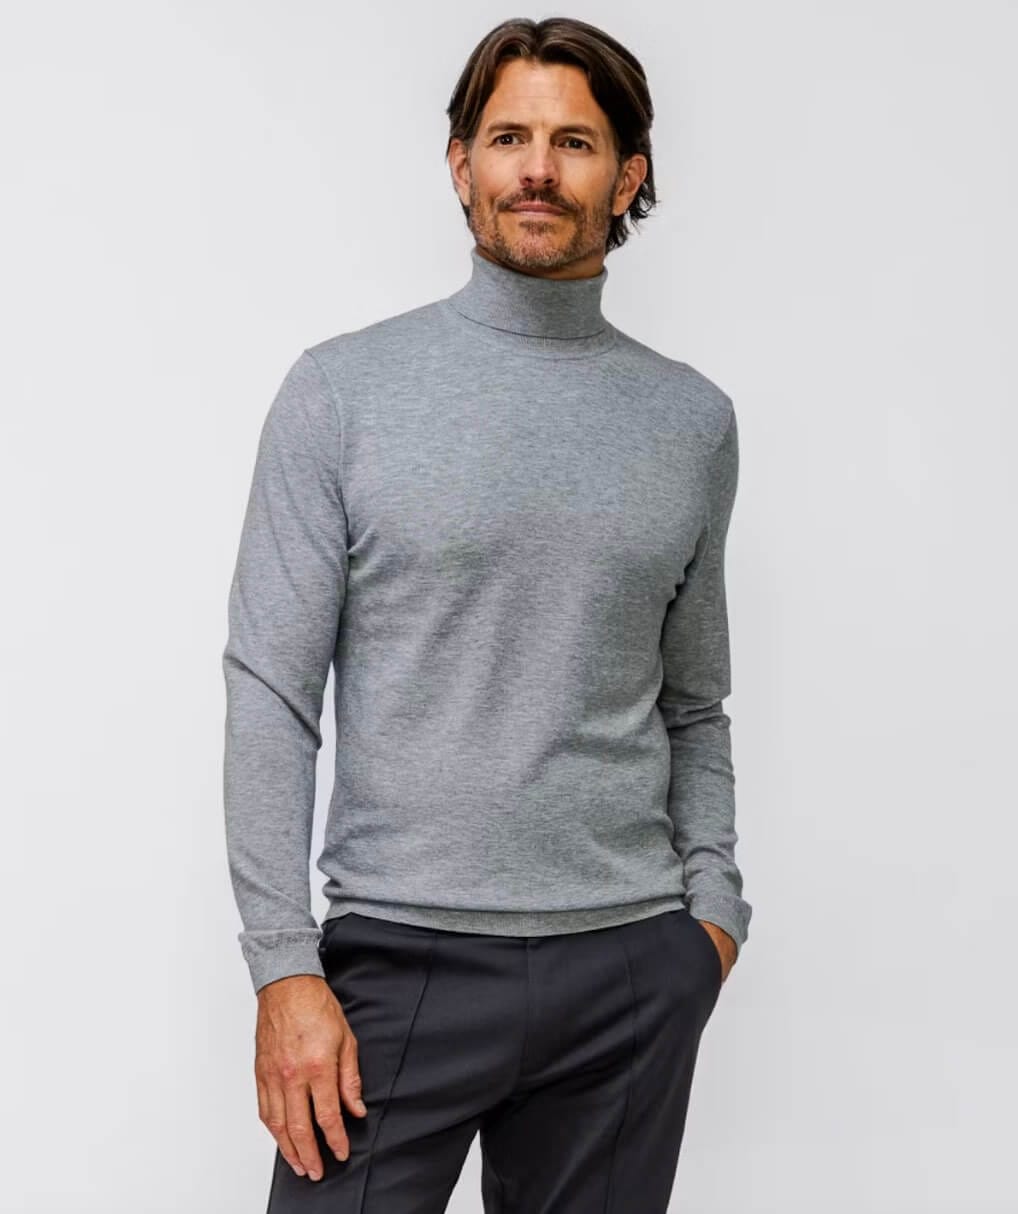 Sustainable Turtleneck for men by minstry of supply